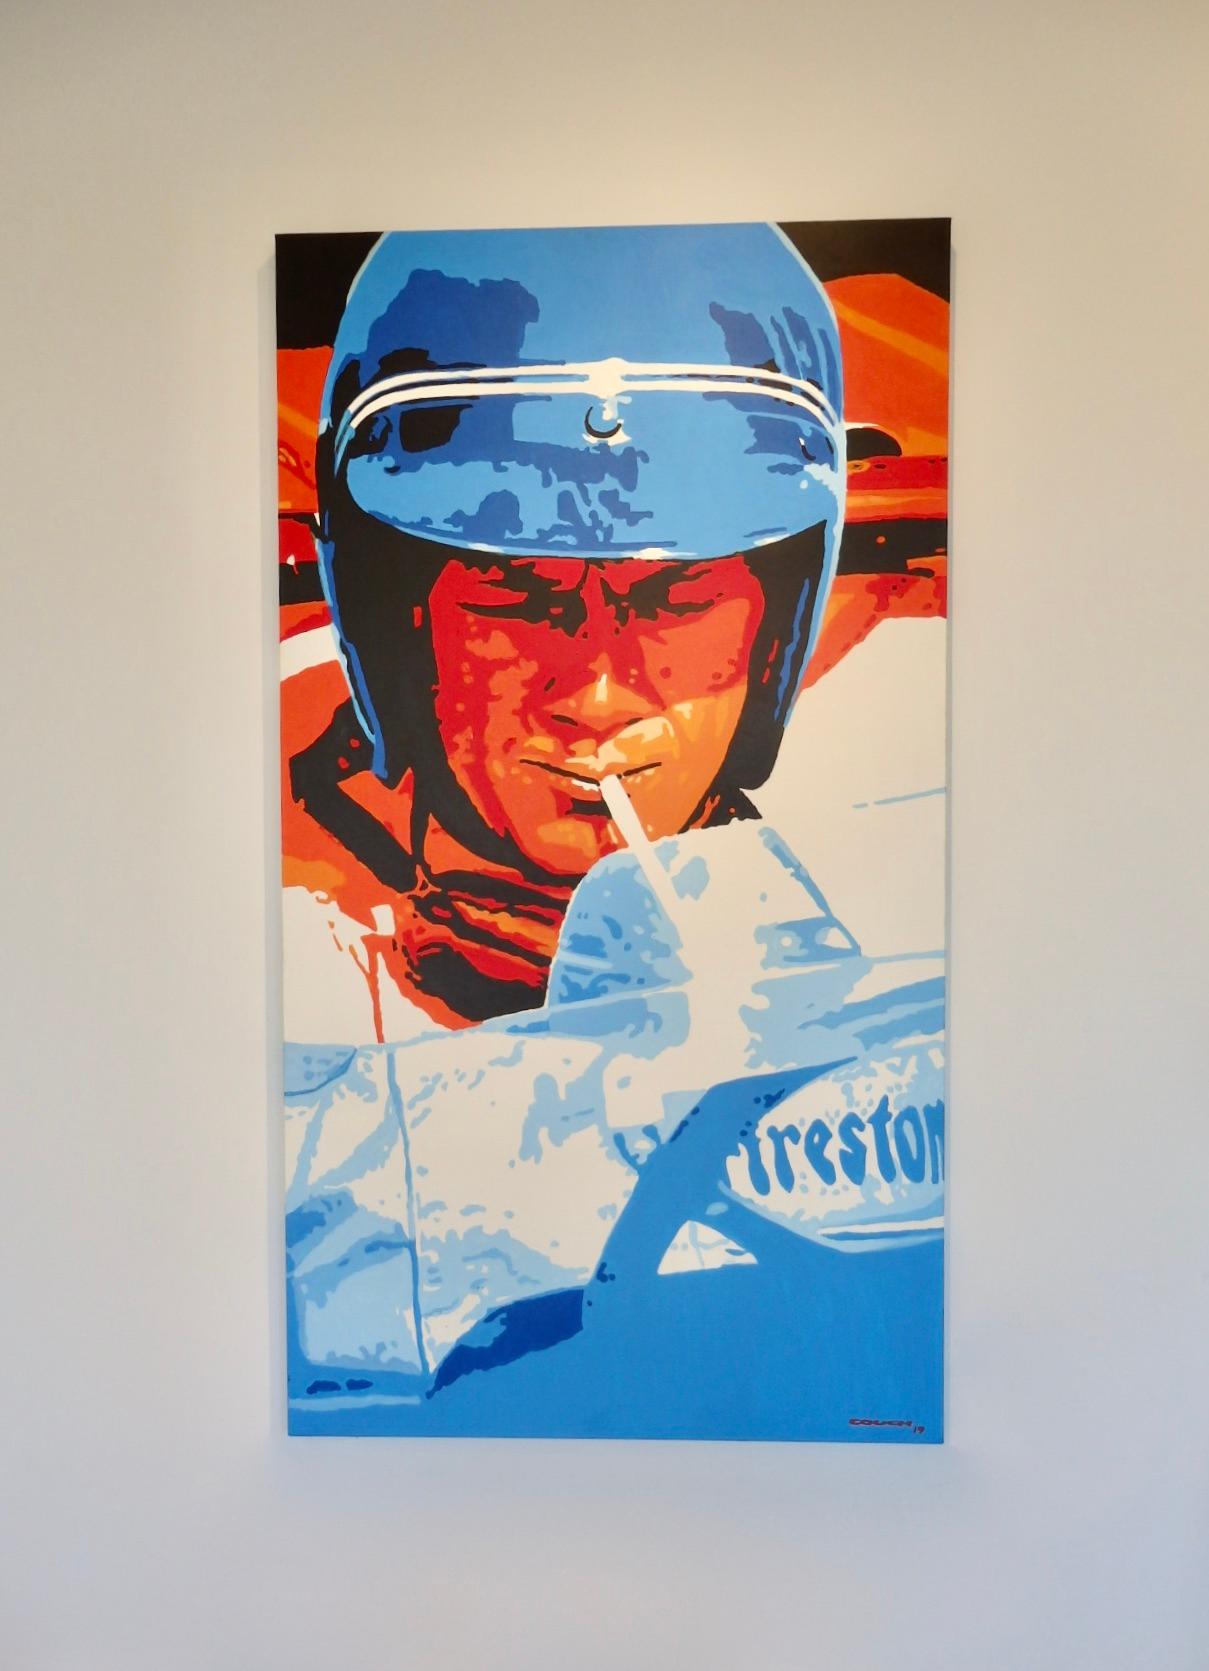 Steve McQueen as seen in the 1971 film Lemans. Large format painting by Billy Couch Detroit area artist.